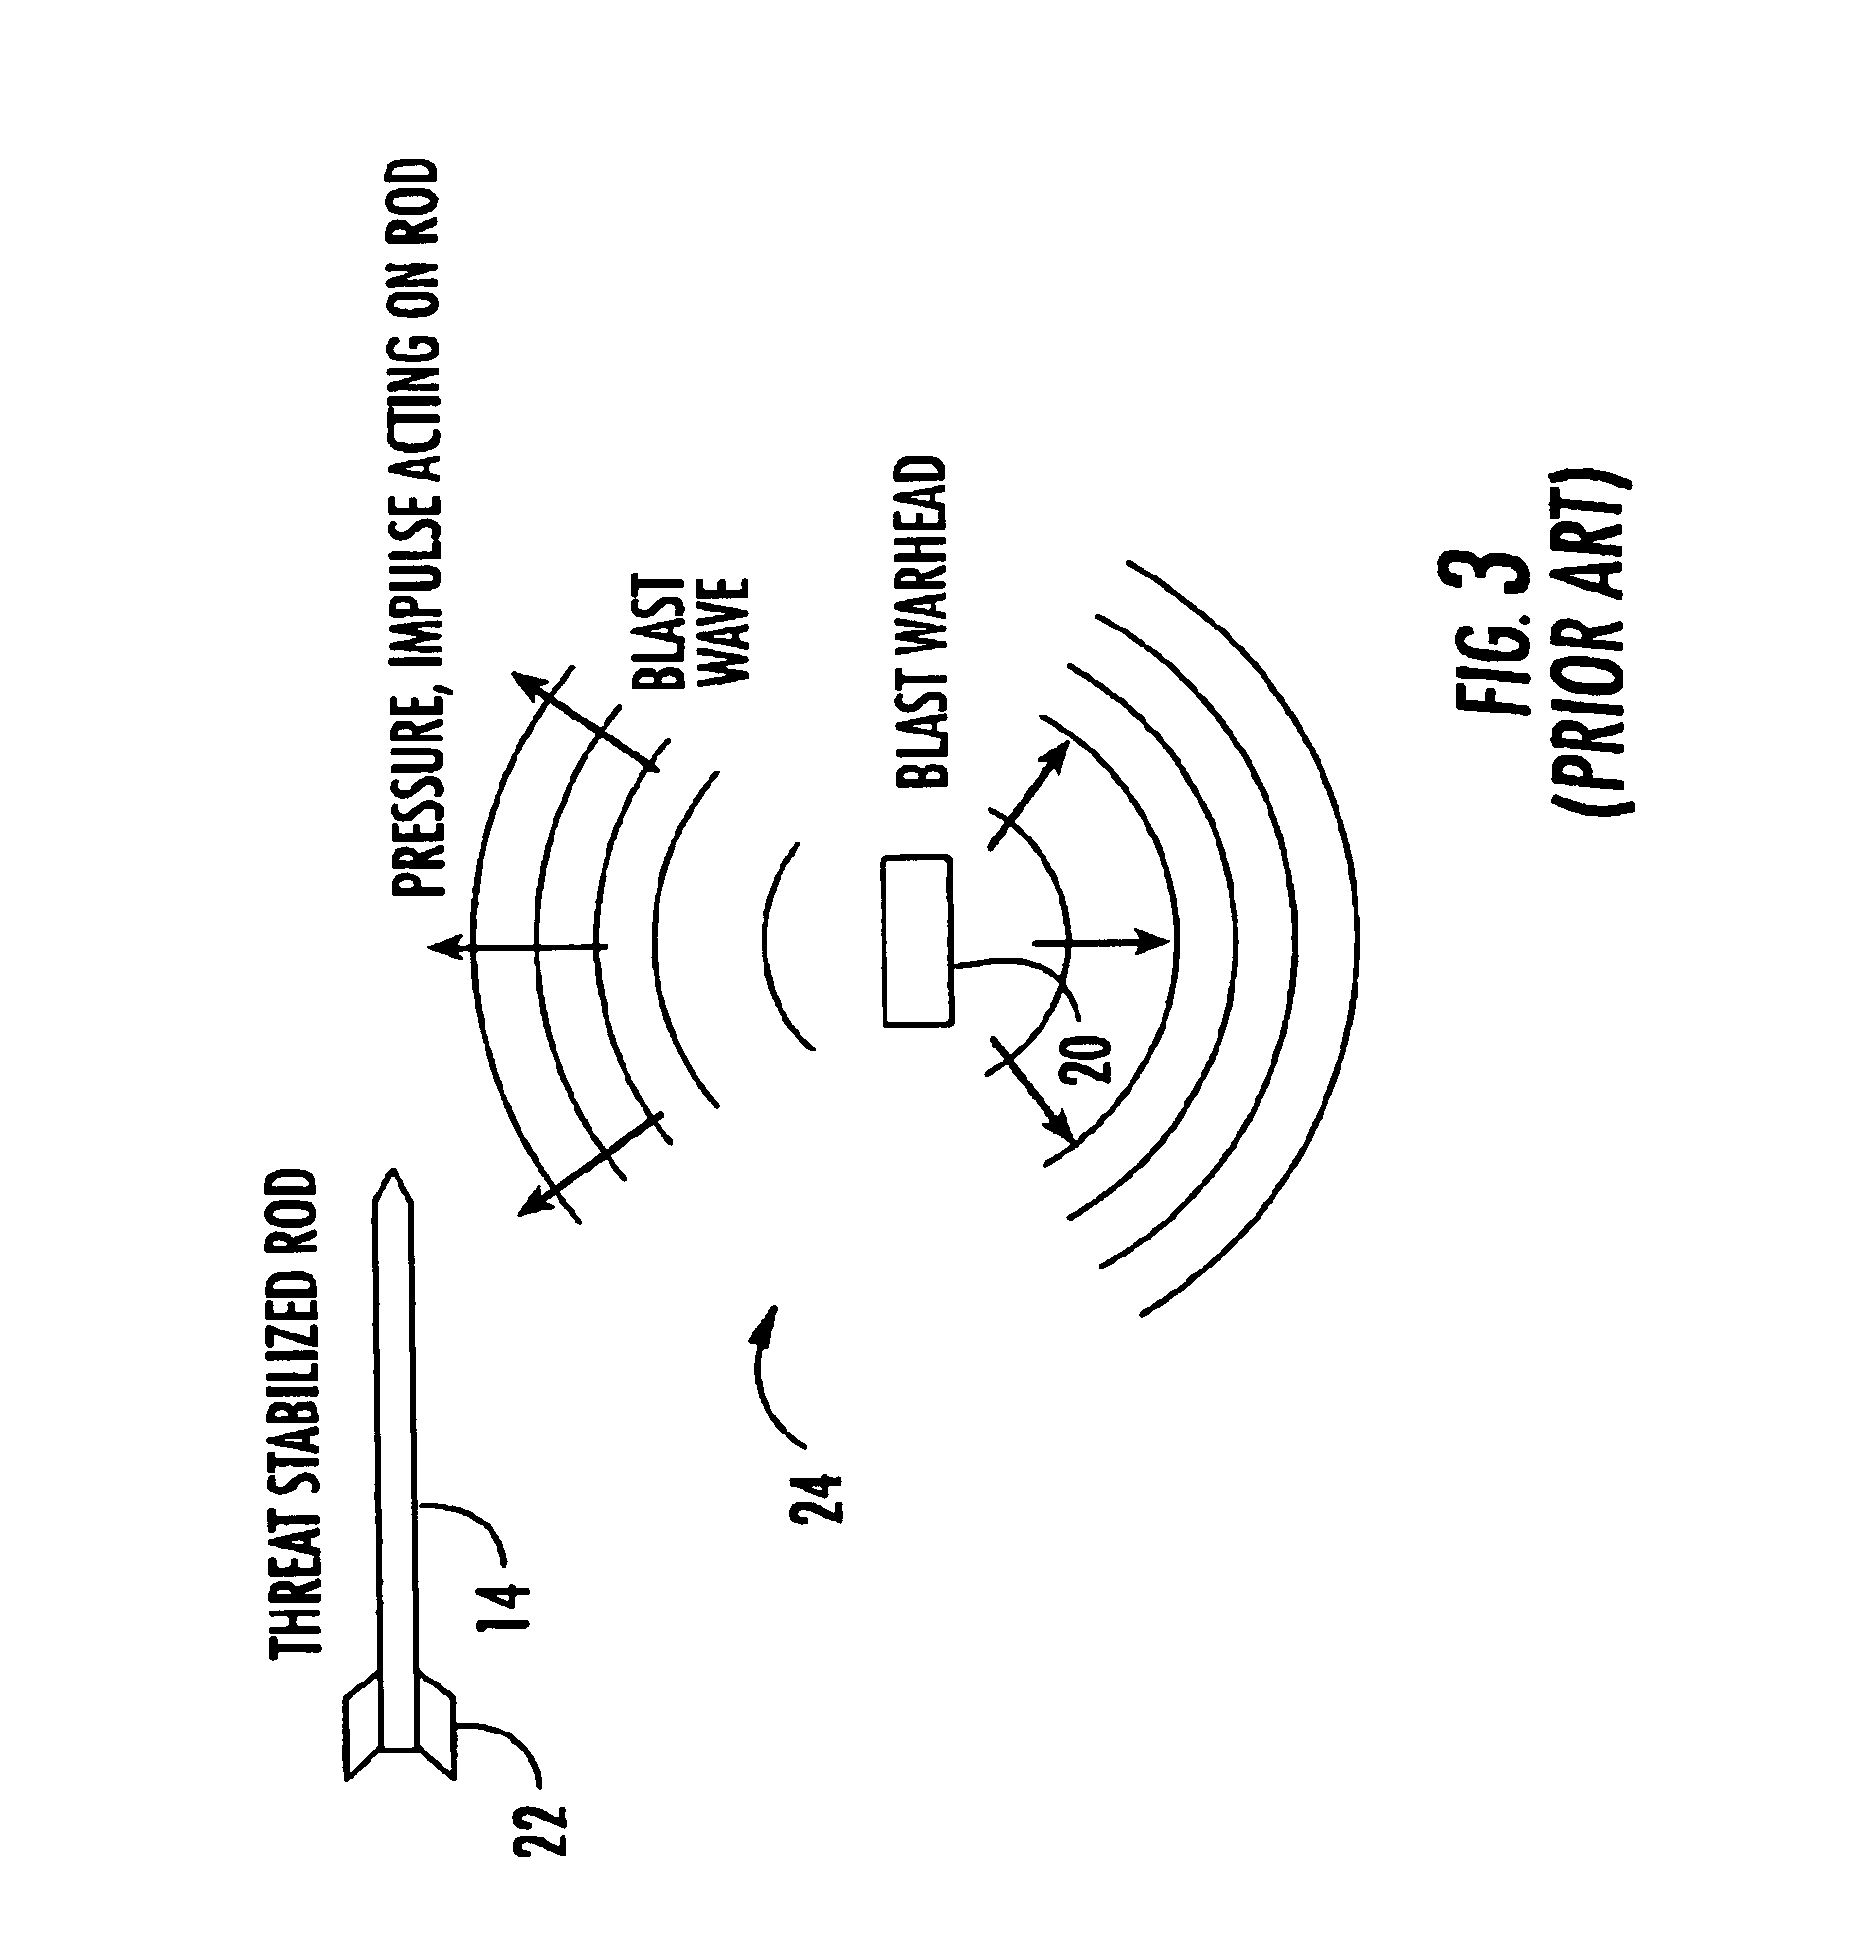 Vehicle-borne system and method for countering an incoming threat